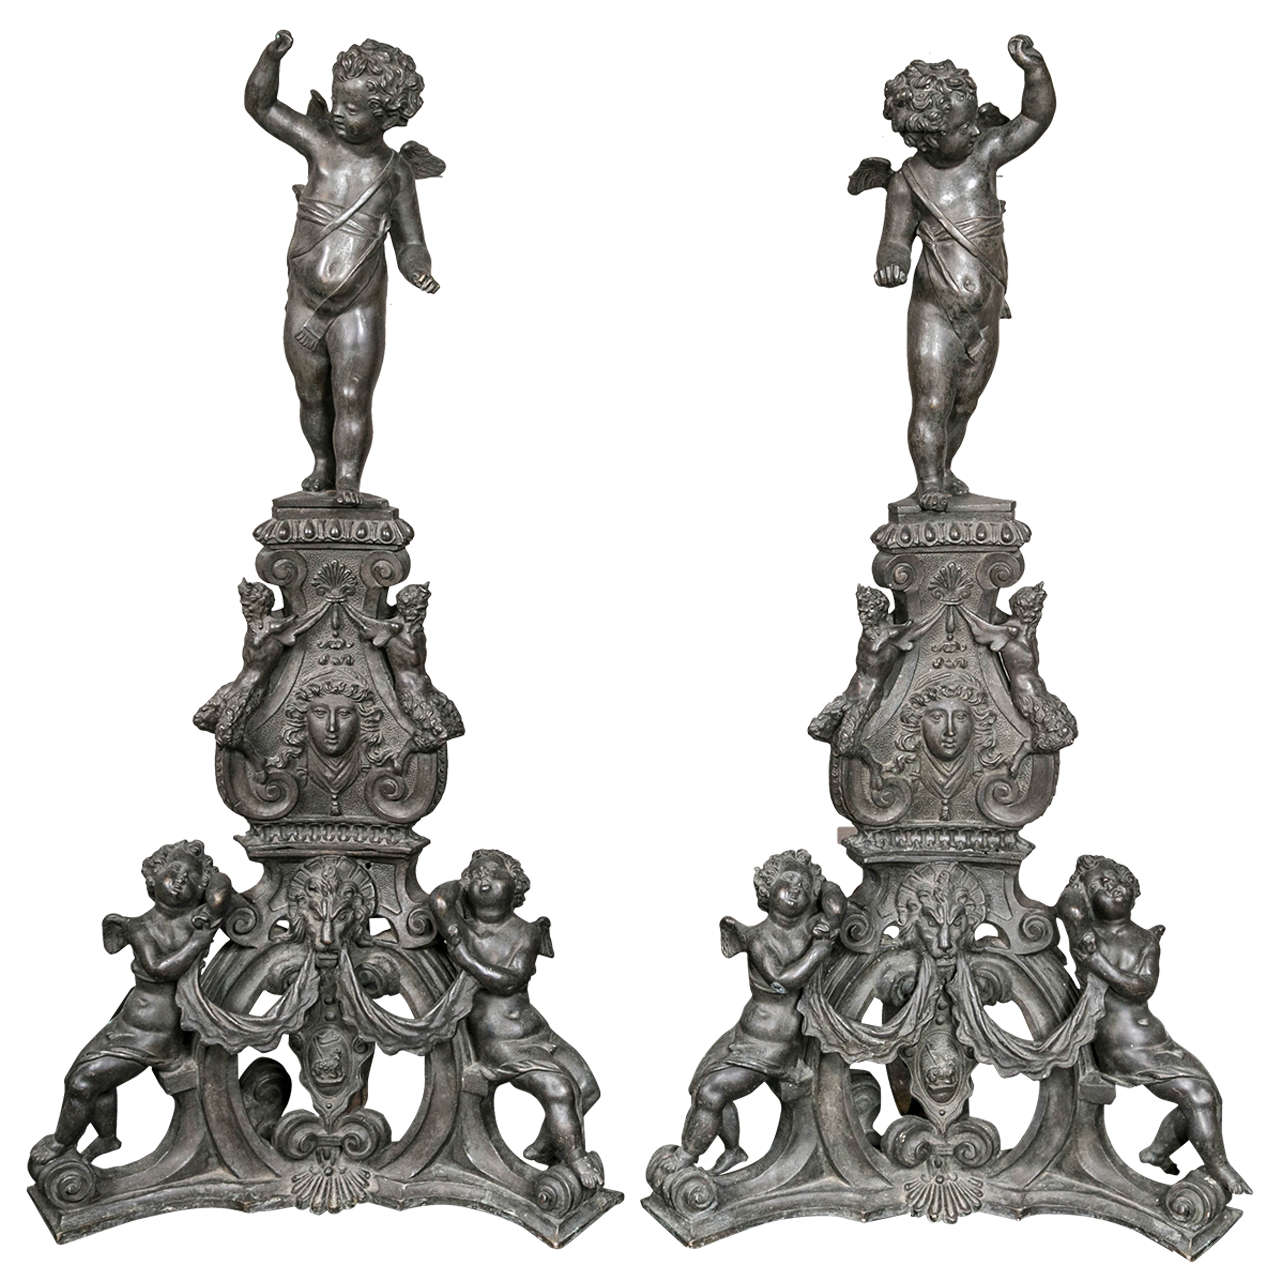 Monumental Pair of French Bronze Andirons